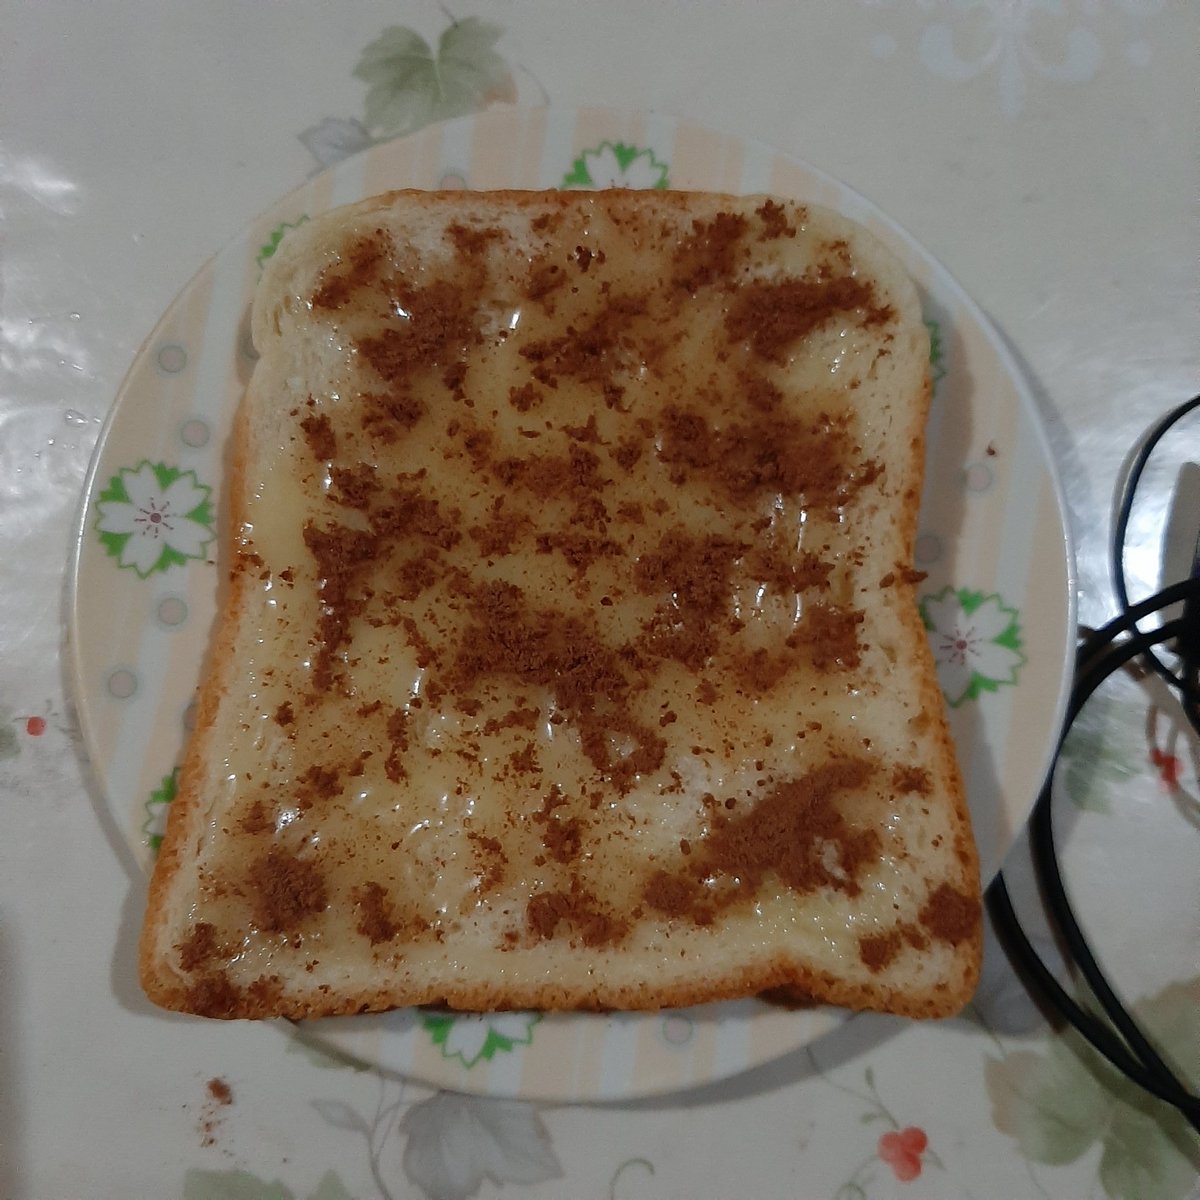 DAY #8 ㅡ 01/05 06:02 PManother messy bread bcs i think im in luv 